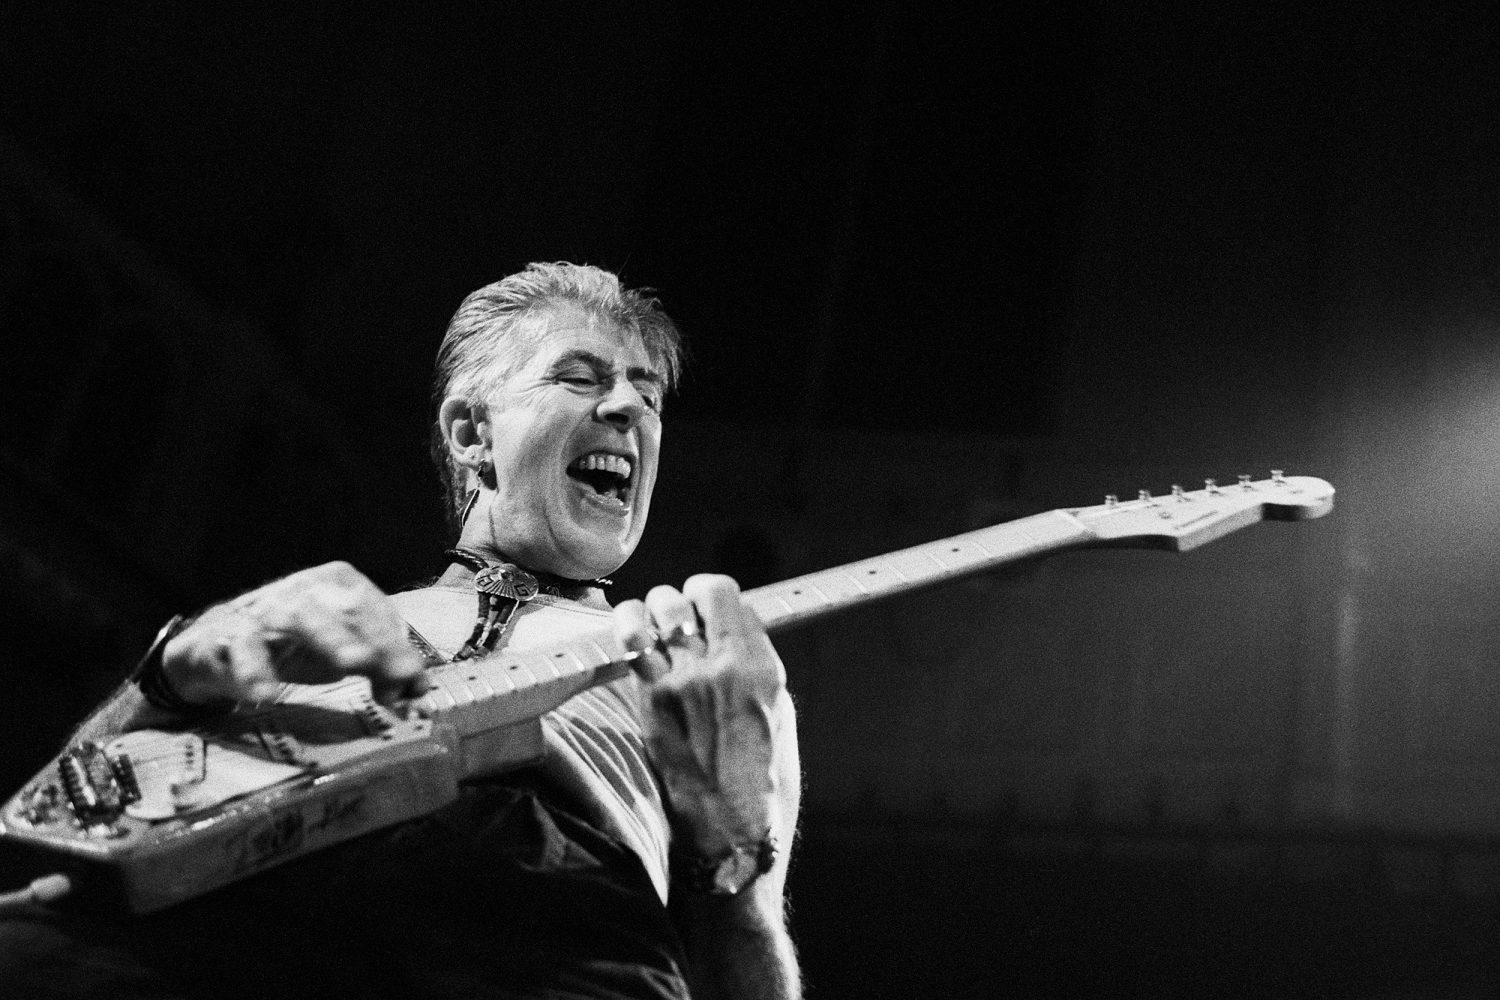 John Mayall, influential British blues pioneer who inspired Fleetwood Mac and Eric Clapton, dies at 90